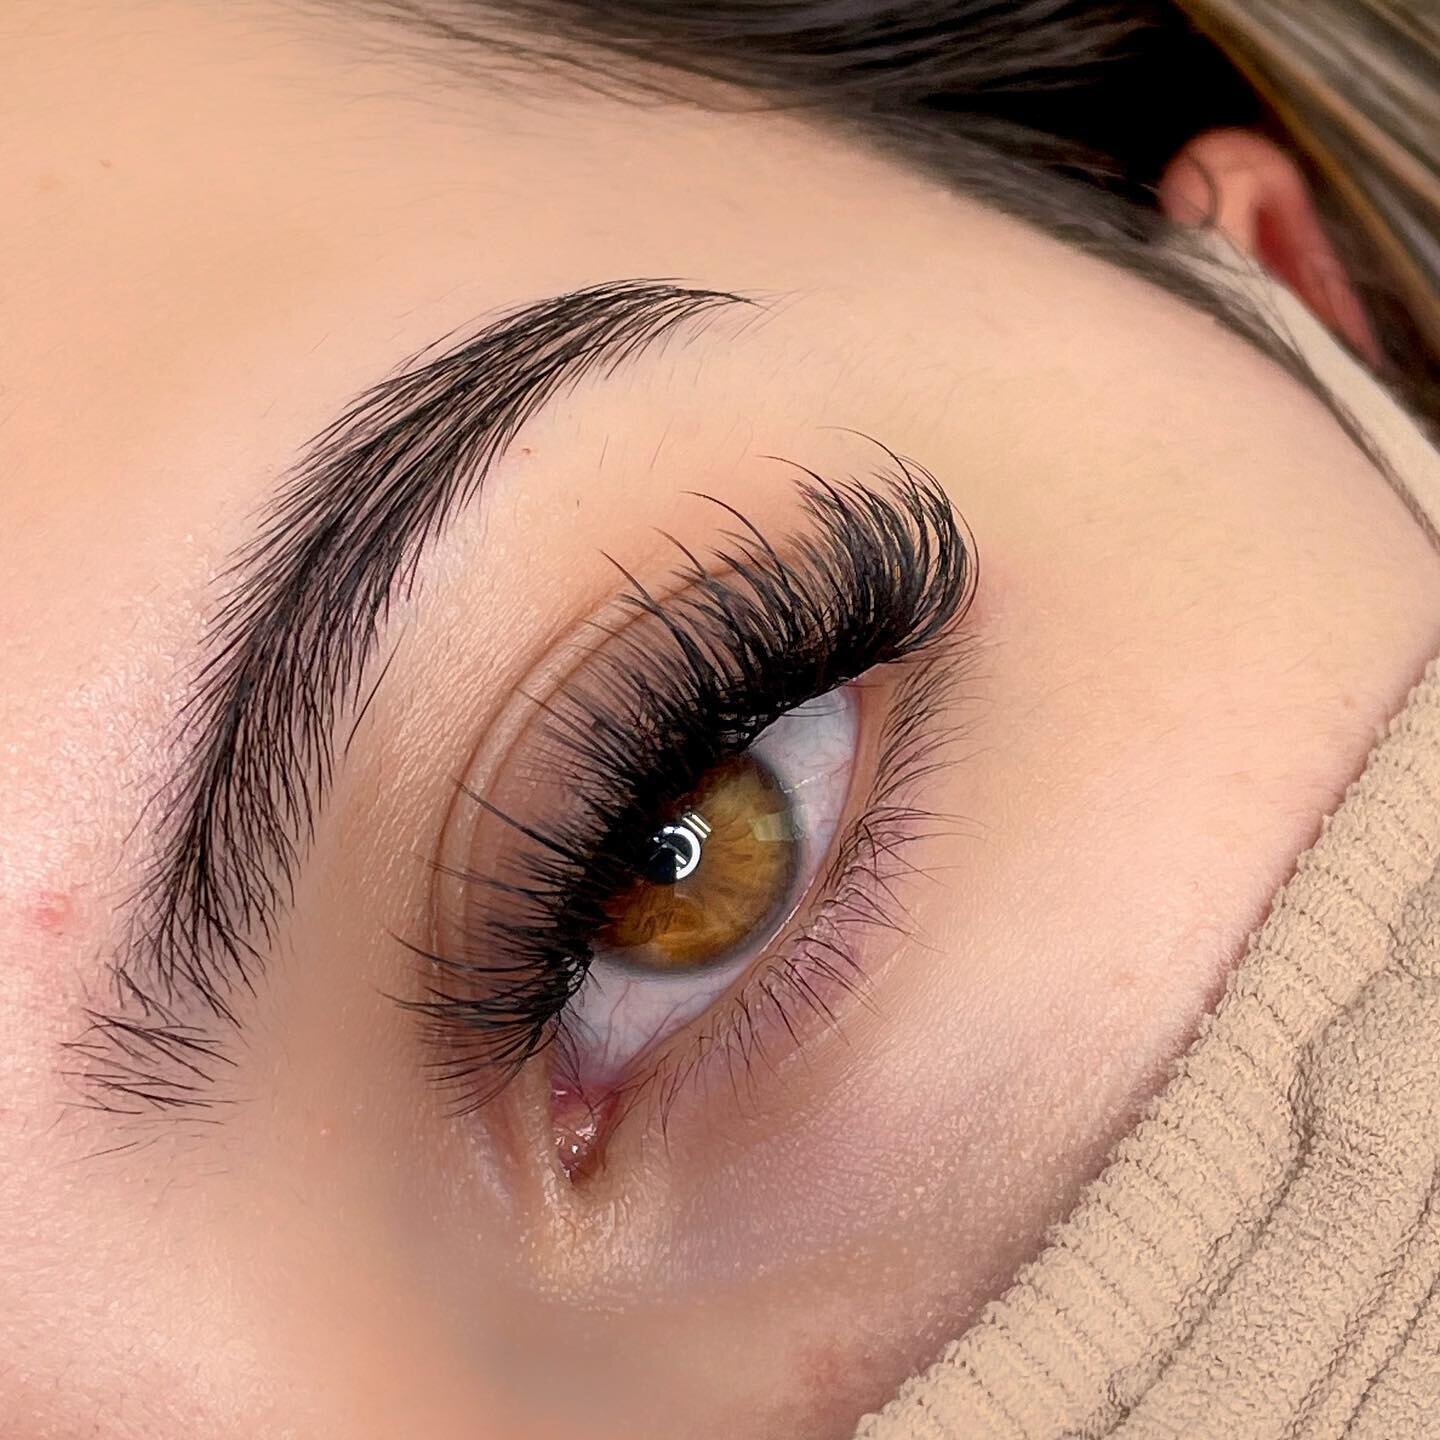 Trying to figure out a new theme for my page so I played around with some editing and wow 😯😍 Swipe &rarr; for the before edit!
P.S. - we never ever edit the lashes! What do you think? ☺️
P.S.S. - I am still not able to accept new lash clients until